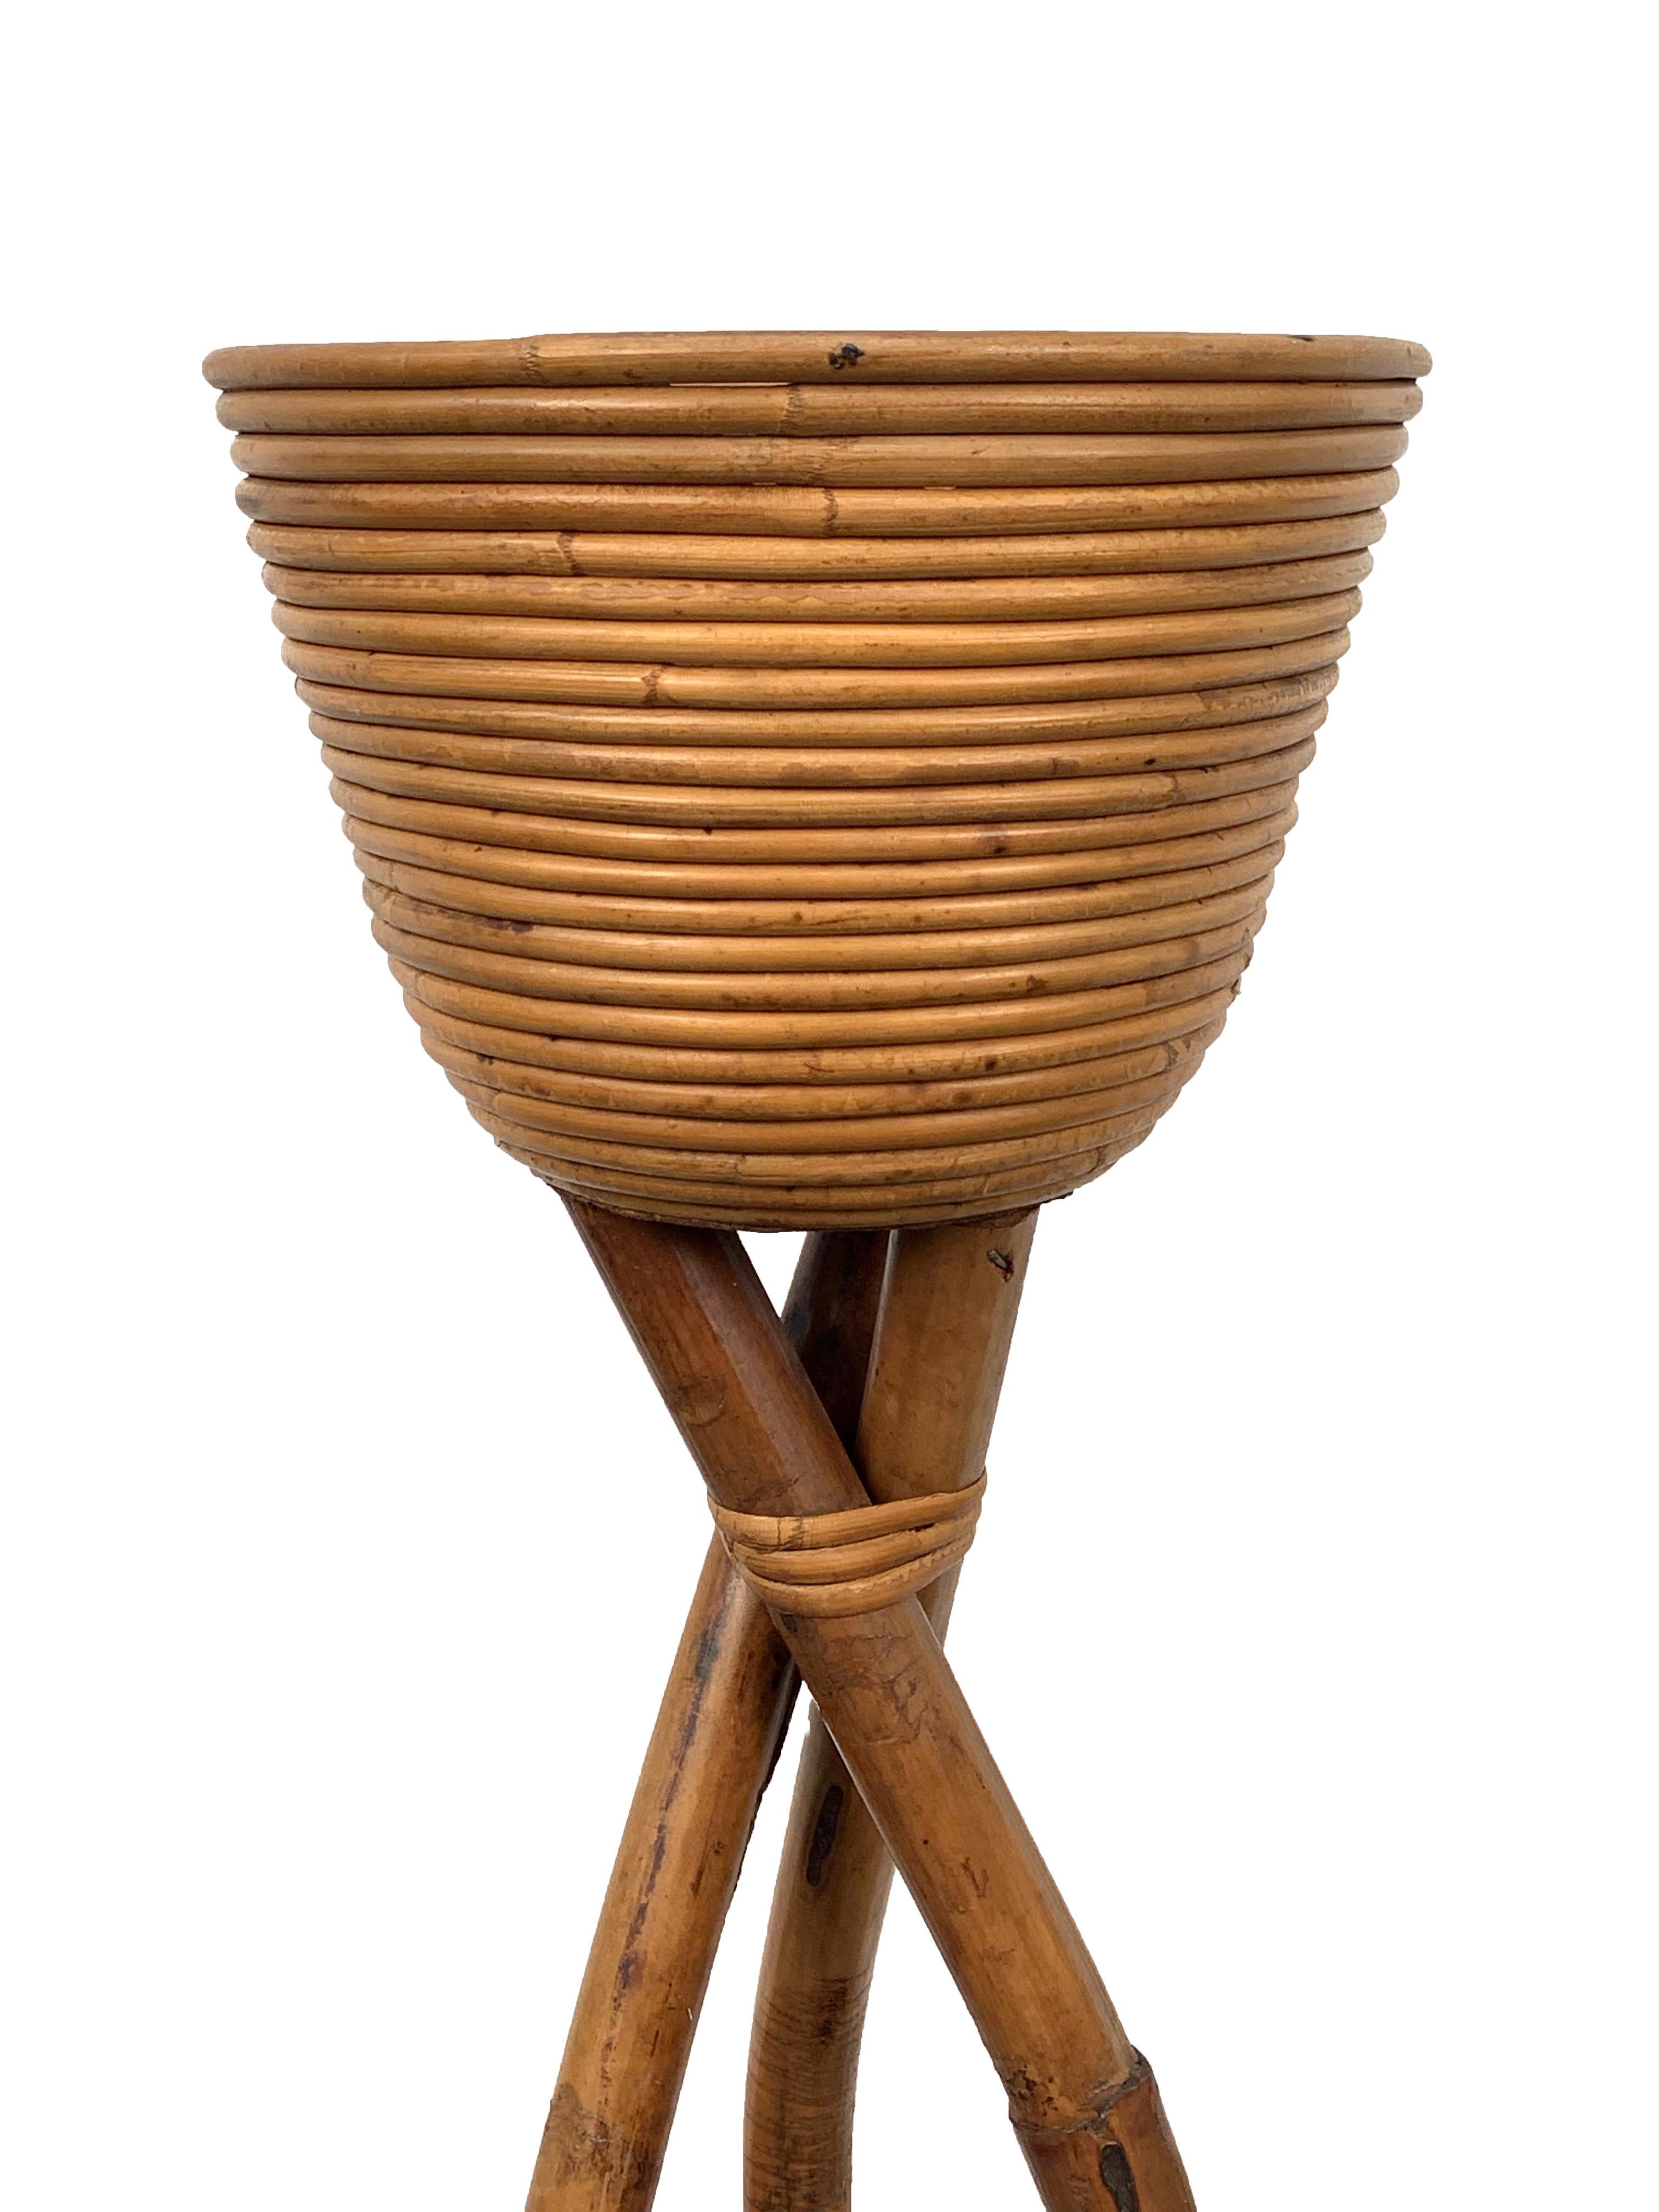 20th Century Midcentury Rattan and Bamboo after Gabriella Crespi Plant Stand Table, 1950s